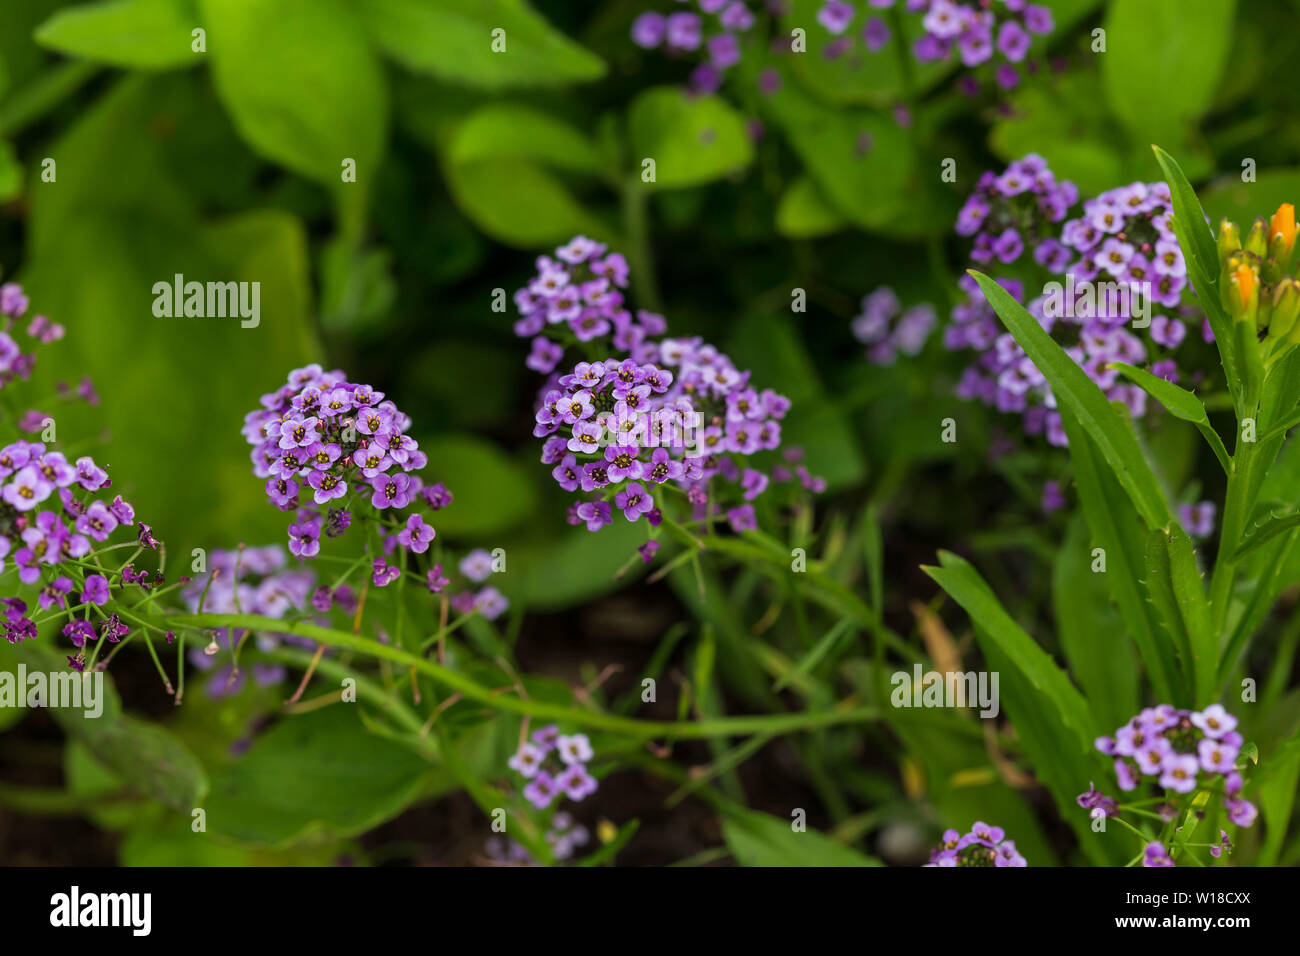 a group of small white and purple flowers in the wildflower garden Stock Photo